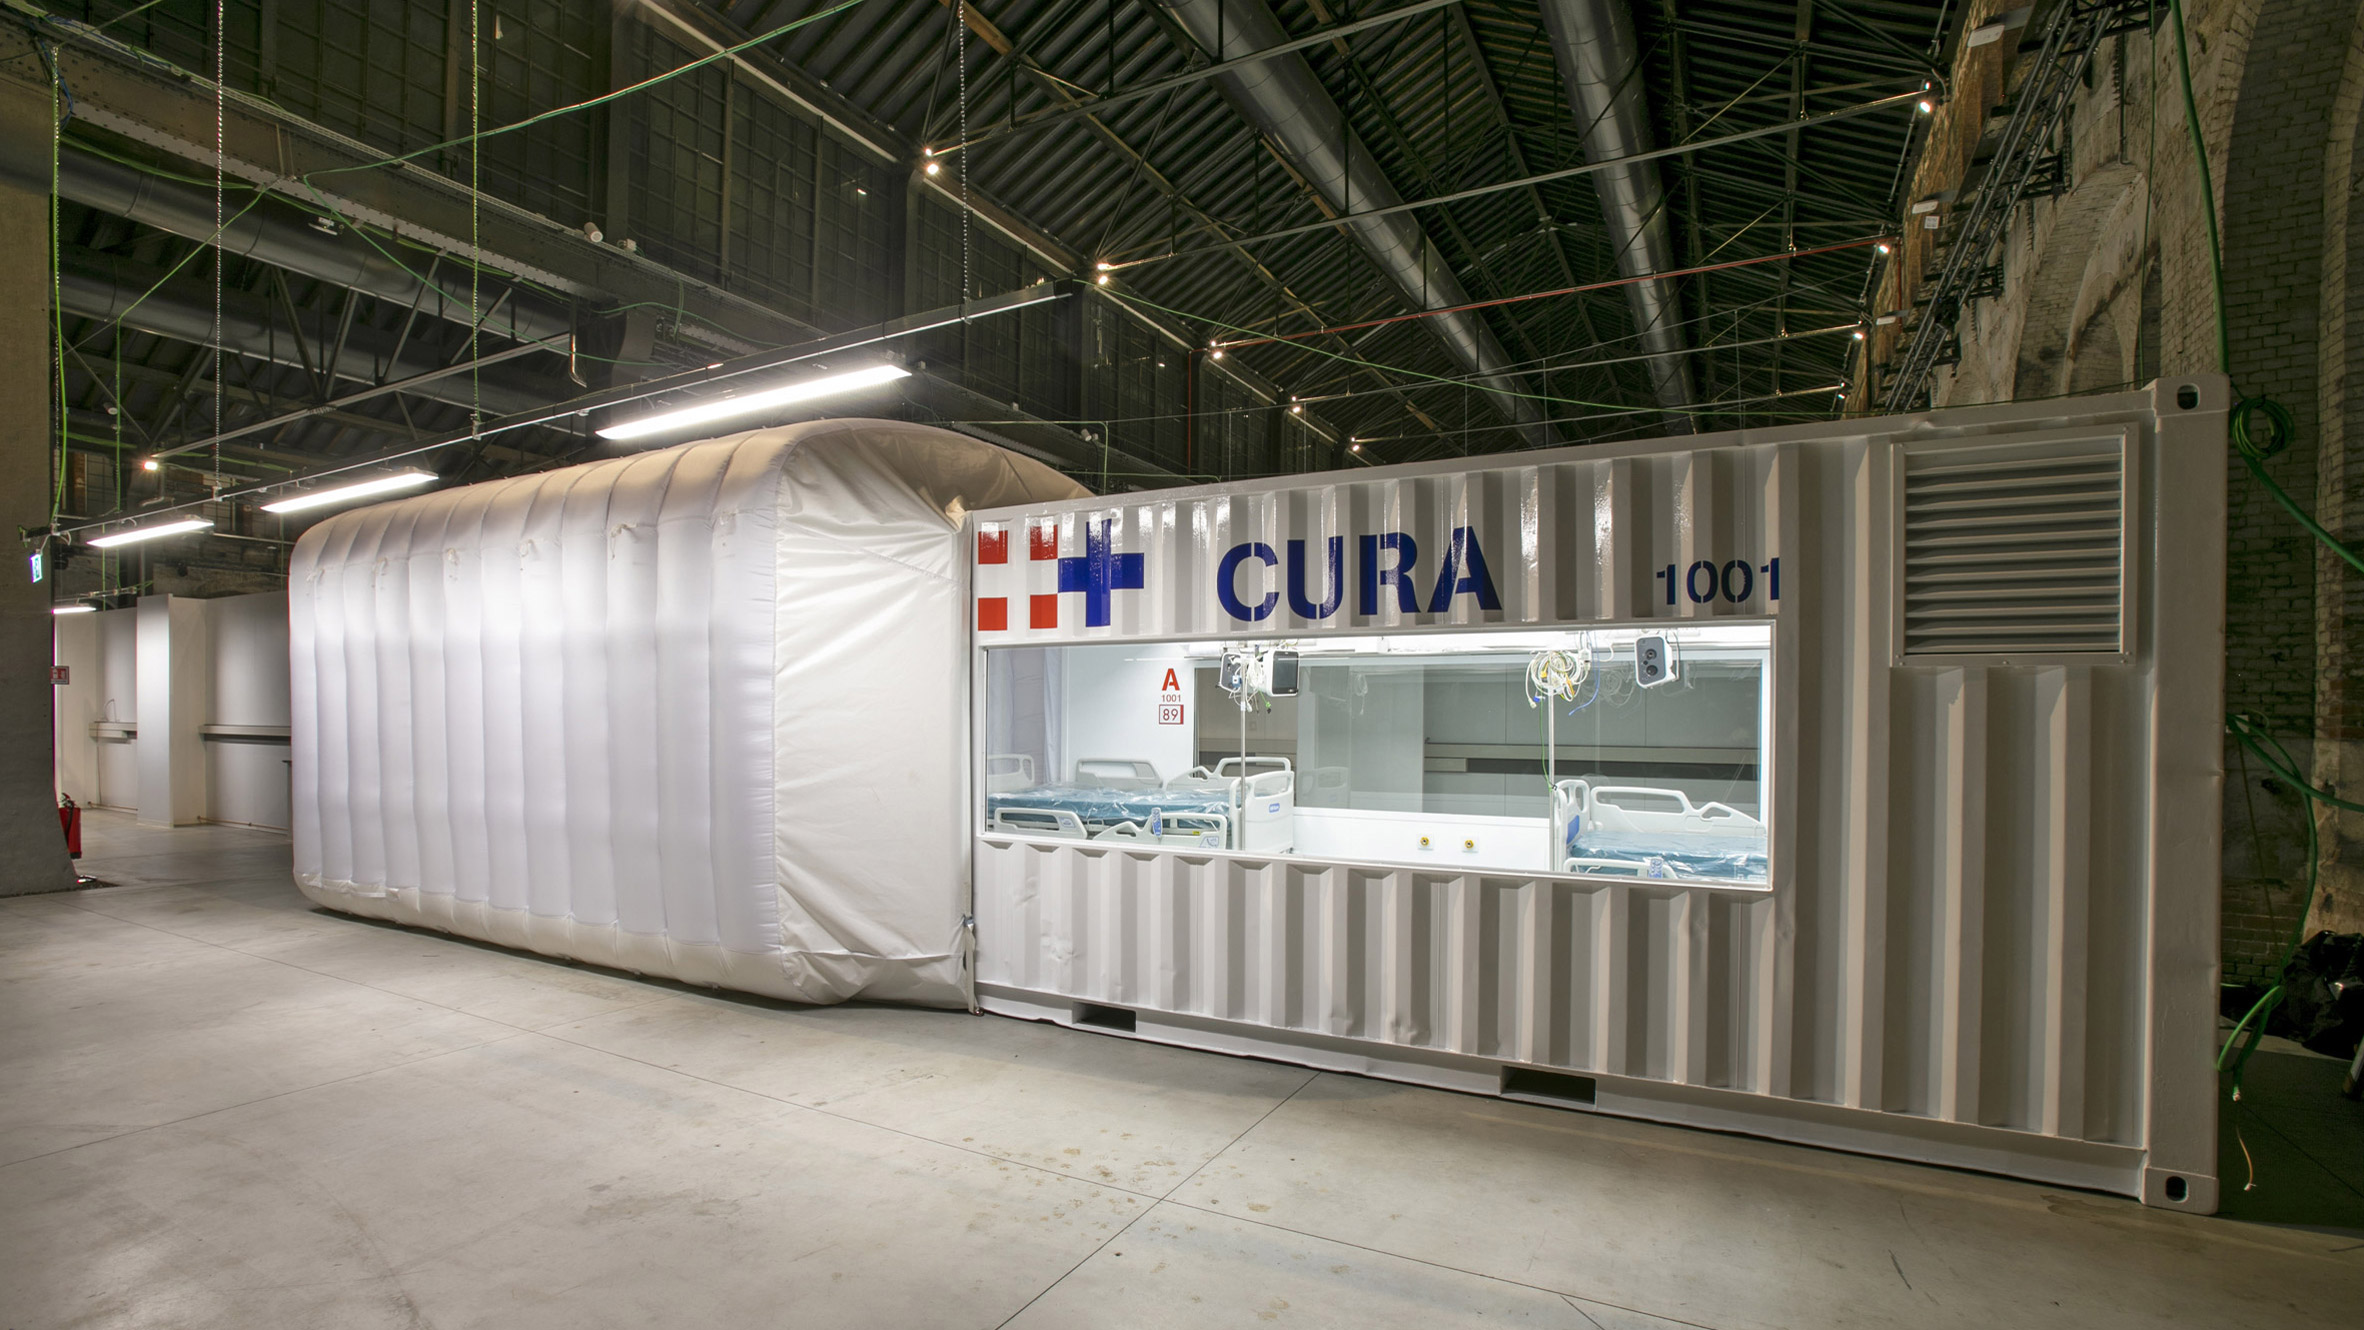 Shipping-container intensive care unit installed at Turin hospital